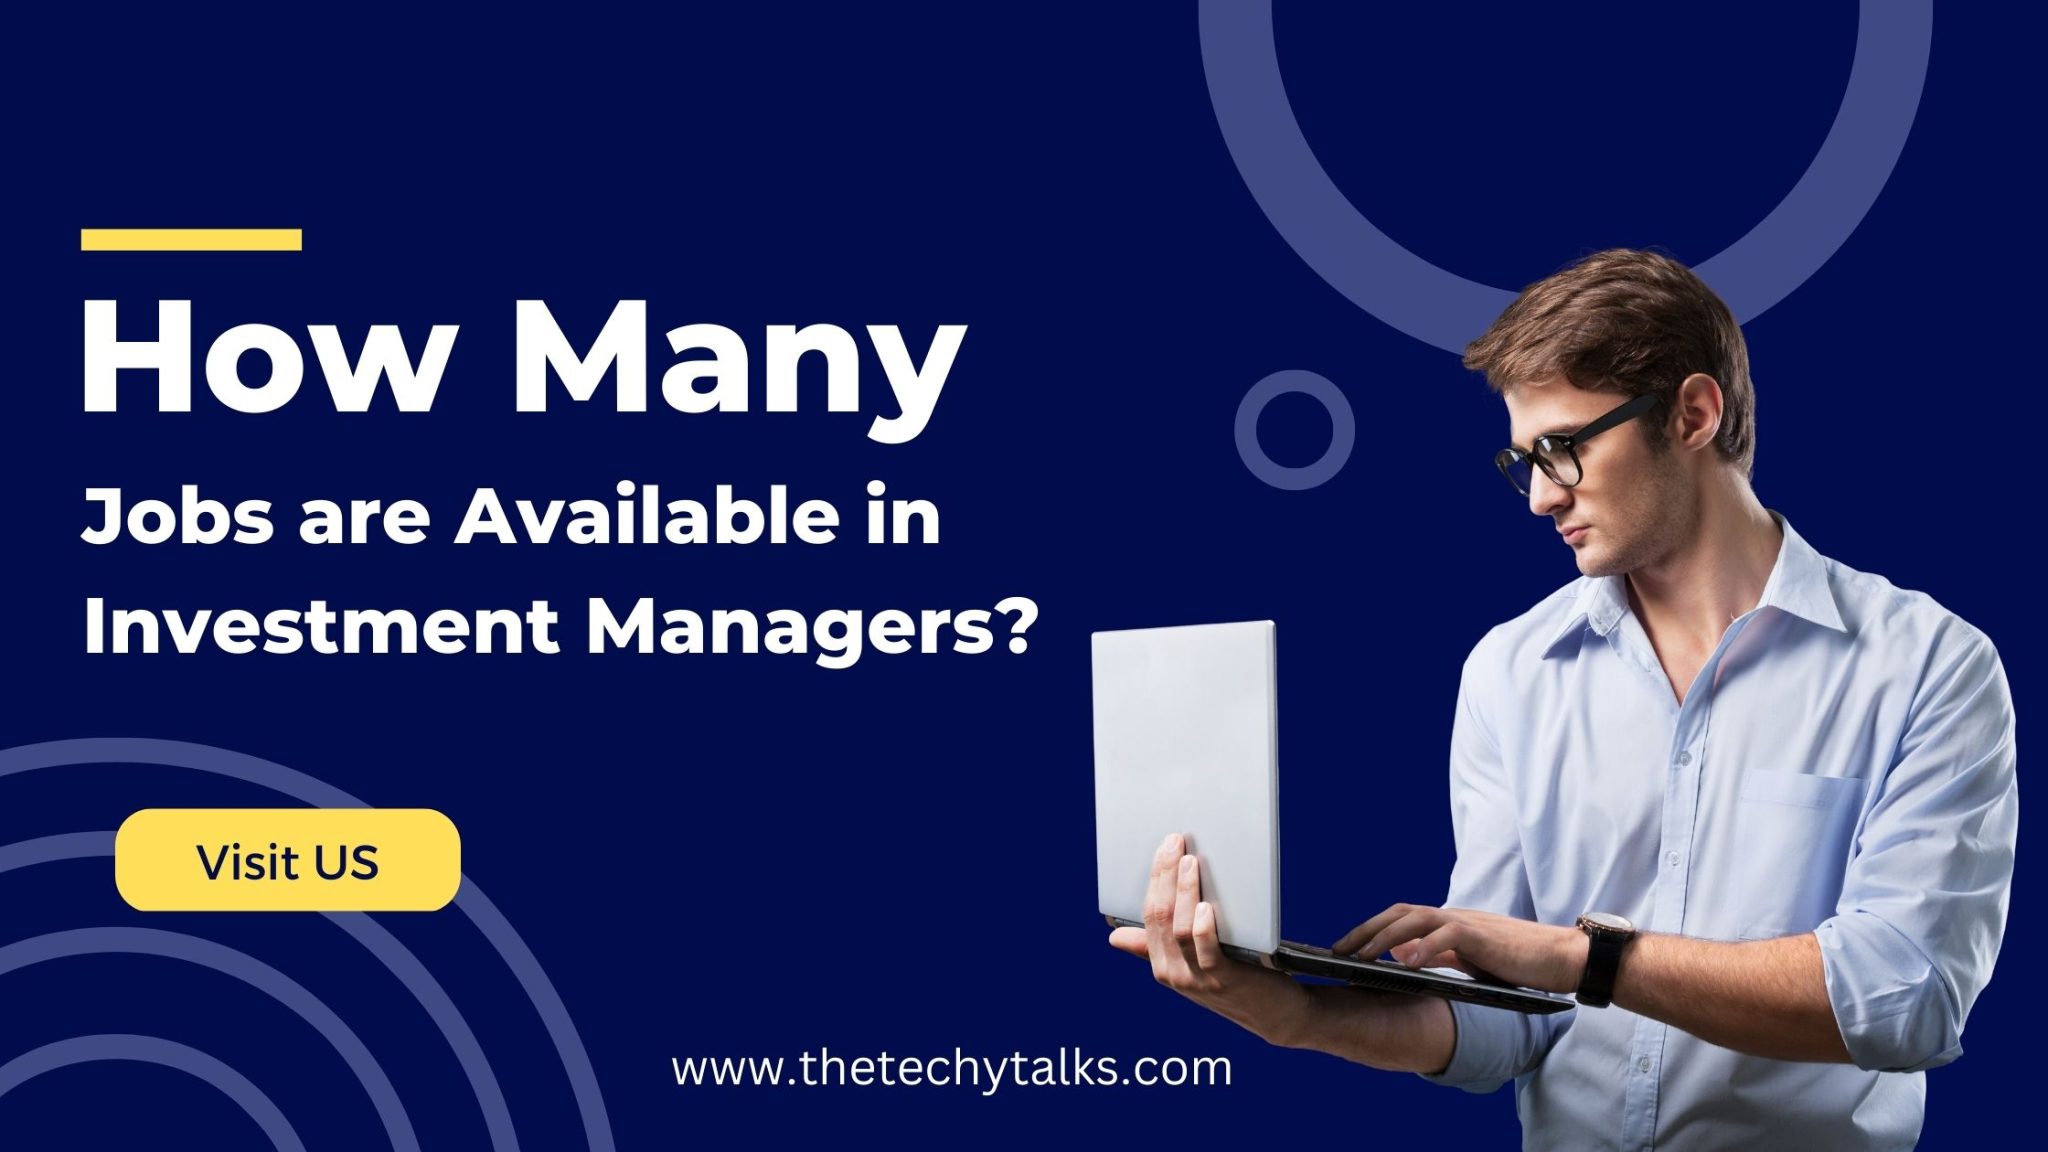 How Many Jobs are Available in Investment Managers?